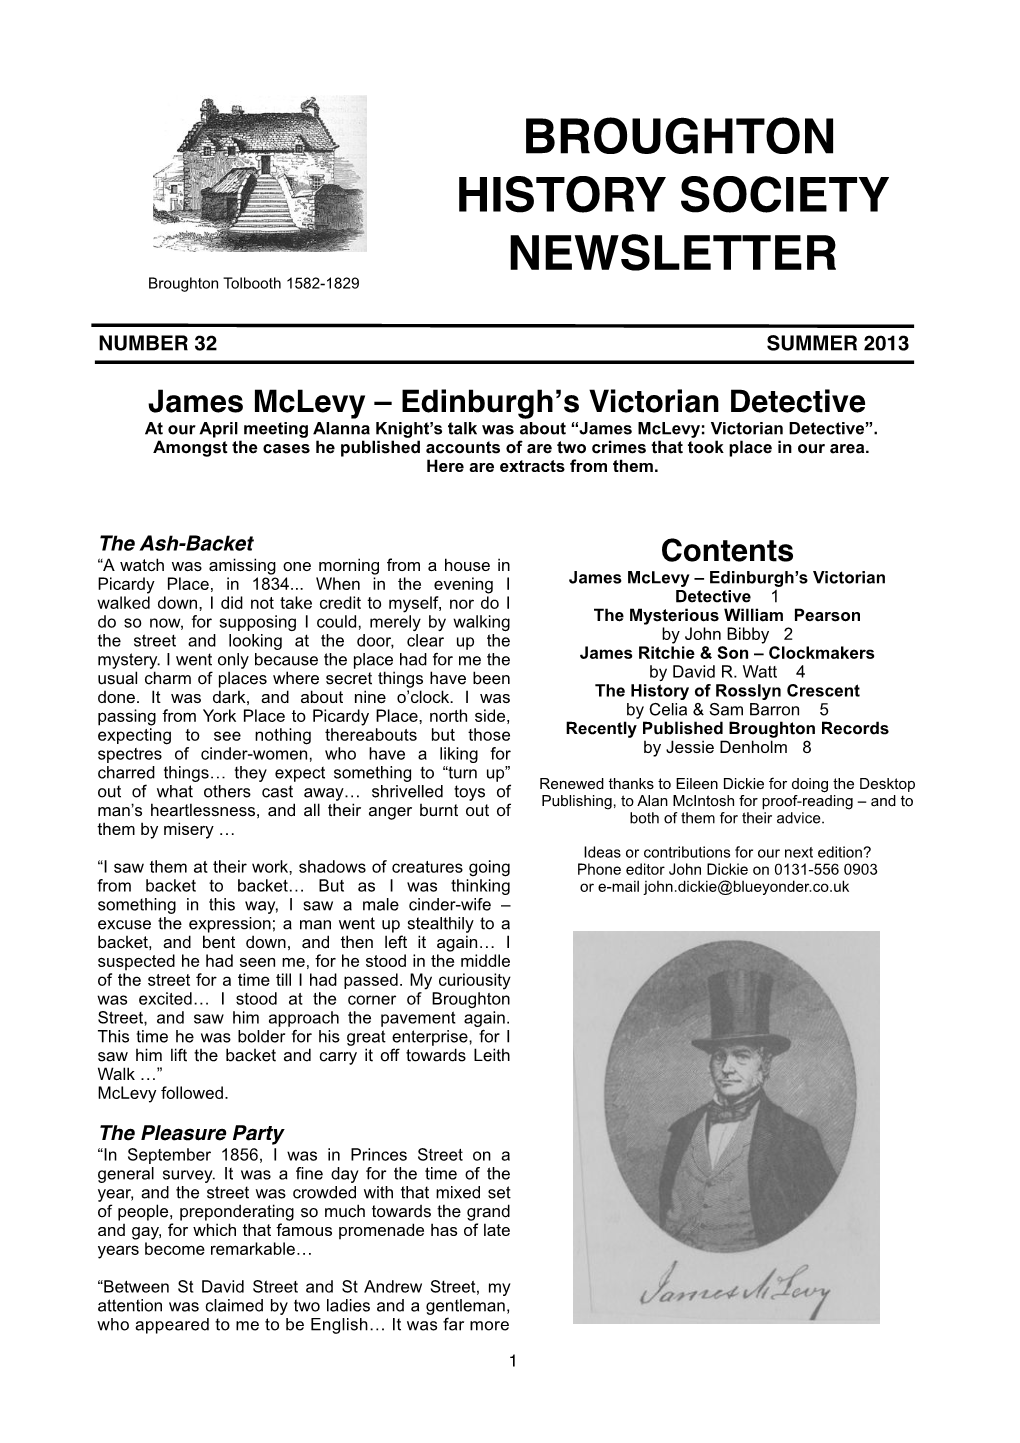 BROUGHTON HISTORY SOCIETY NEWSLETTER Broughton Tolbooth 1582-1829